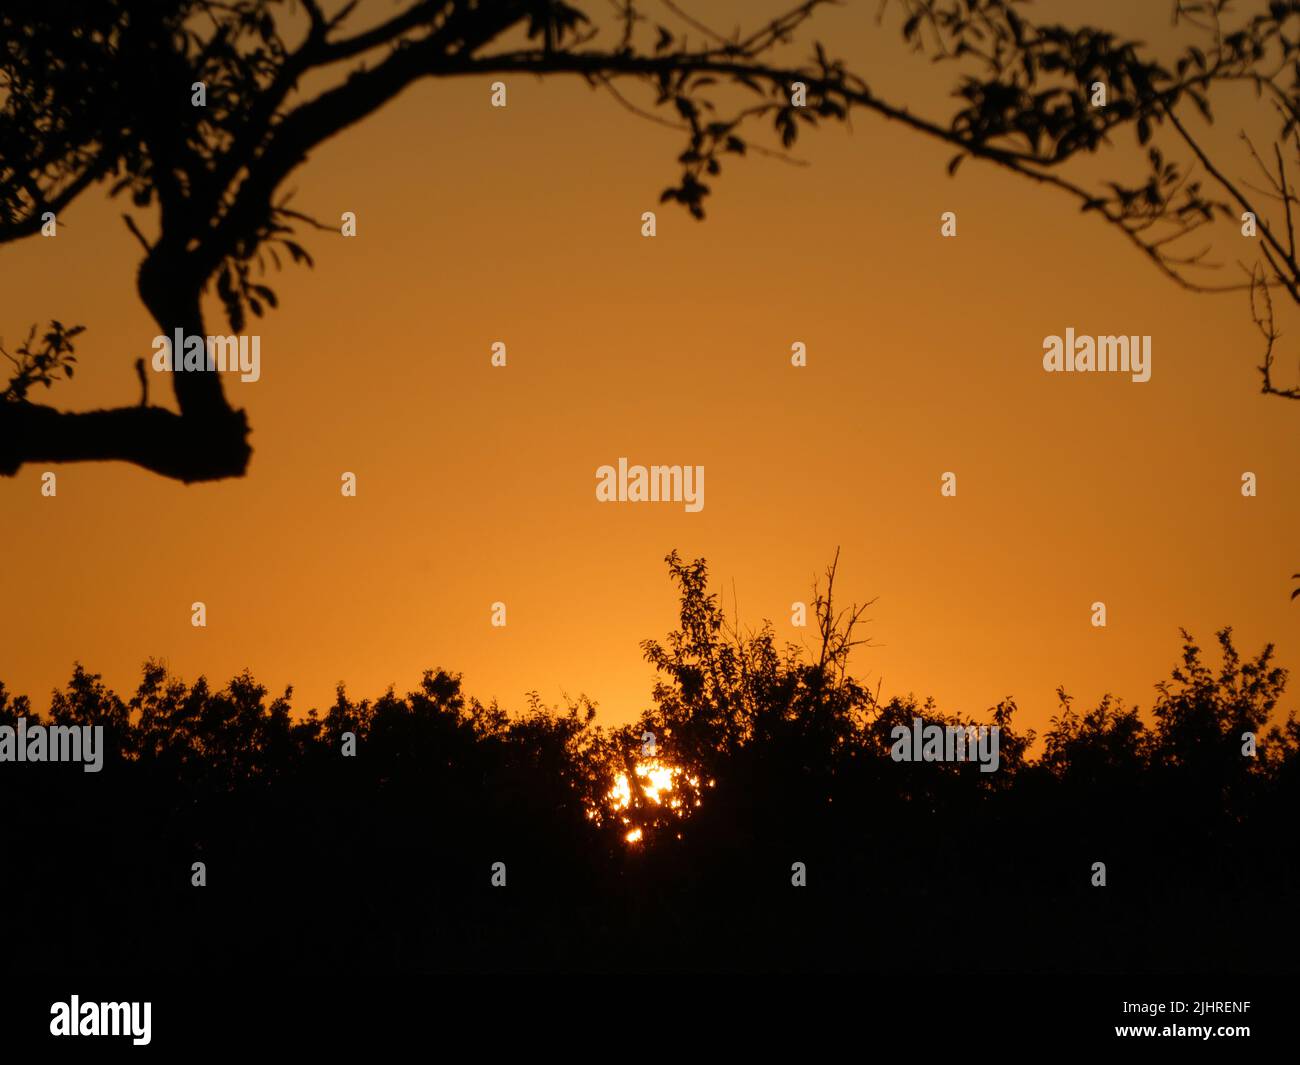 Romantic sunset in orange and black with branches in the Rhine valley Stock Photo